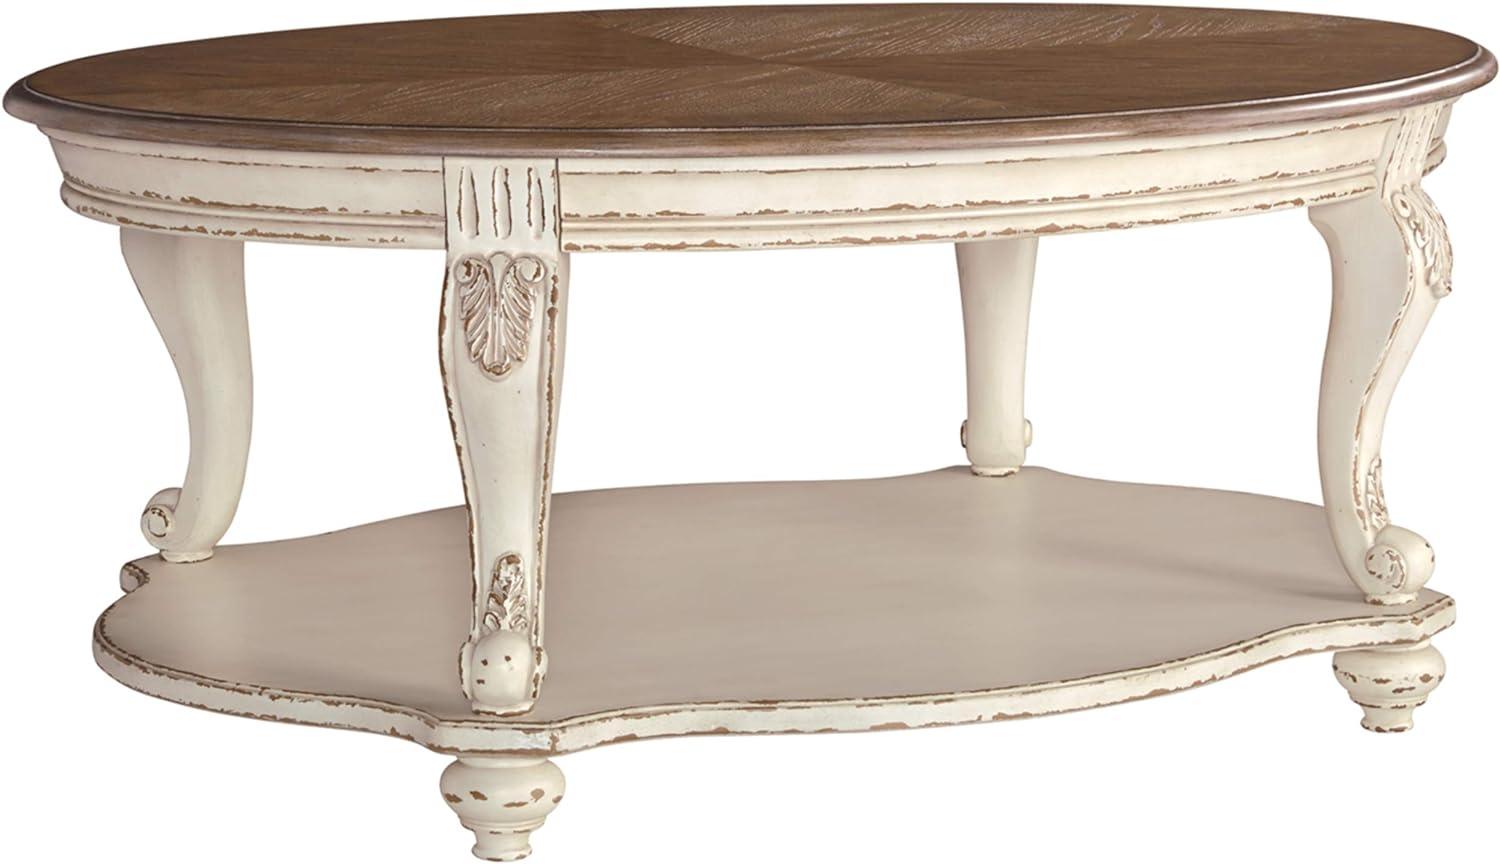 Antiqued Two-Tone Oval Wood Coffee Table with Cabriole Legs